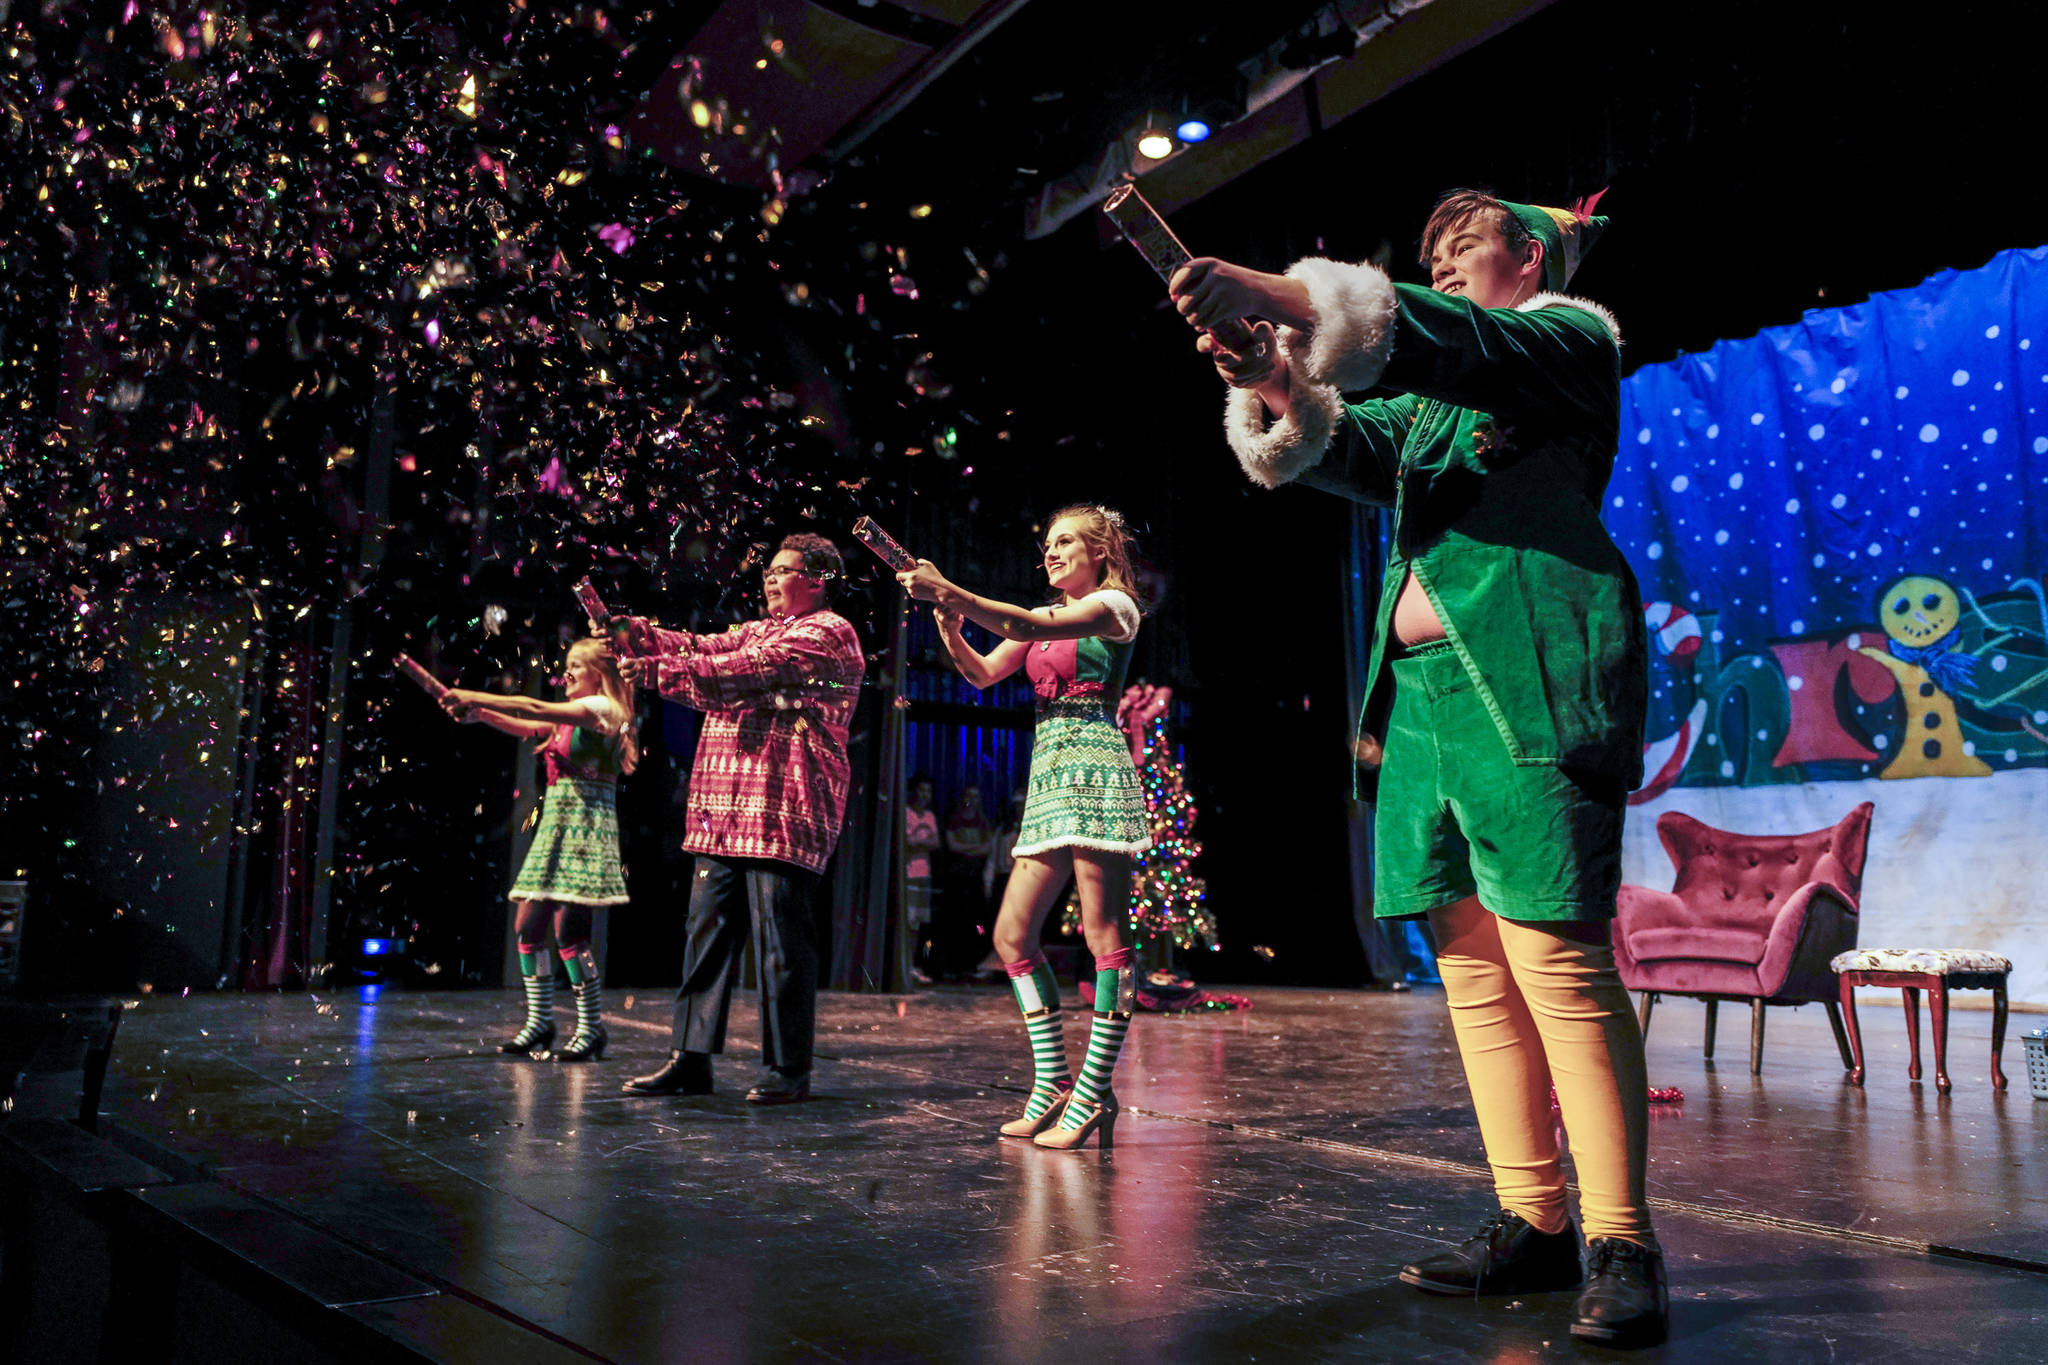 Shelby Yor, left, Roman Mahanyu, Kayla Kohlhase and Toby Russell, right, rehearse “Elf, the Musicial” at Juneau-Douglas High School: Yadaa.at Kalé on Friday, Dec. 13, 2019. (Michael Penn | Juneau Empire)rehearse “Elf, the Musicial” at Juneau-Douglas High School: Yadaa.at Kalé on Friday, Dec. 13, 2019. (Michael Penn | Juneau Empire)